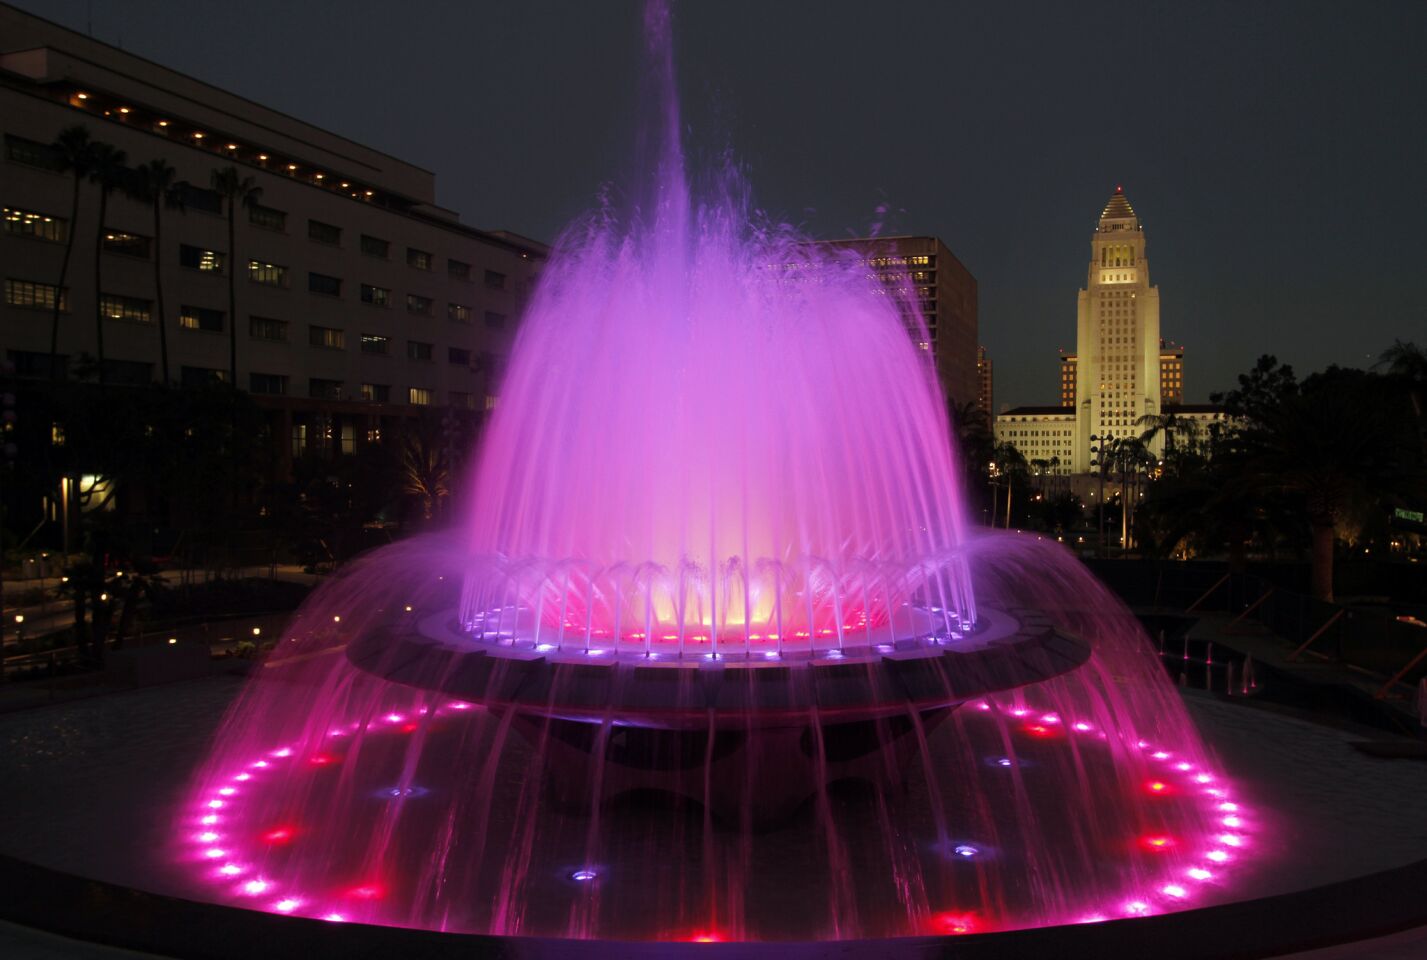 Grand Park, which opened in July, begins near the top of Bunker Hill along Grand Avenue with the renovated Arthur J. Will Memorial Fountain and a dramatic view of the tall white crest of Los Angeles City Hall. The fountain is programmed to run a colorful light show each hour. MORE: Will downtown L.A.'s Grand Park succeed? | Photos